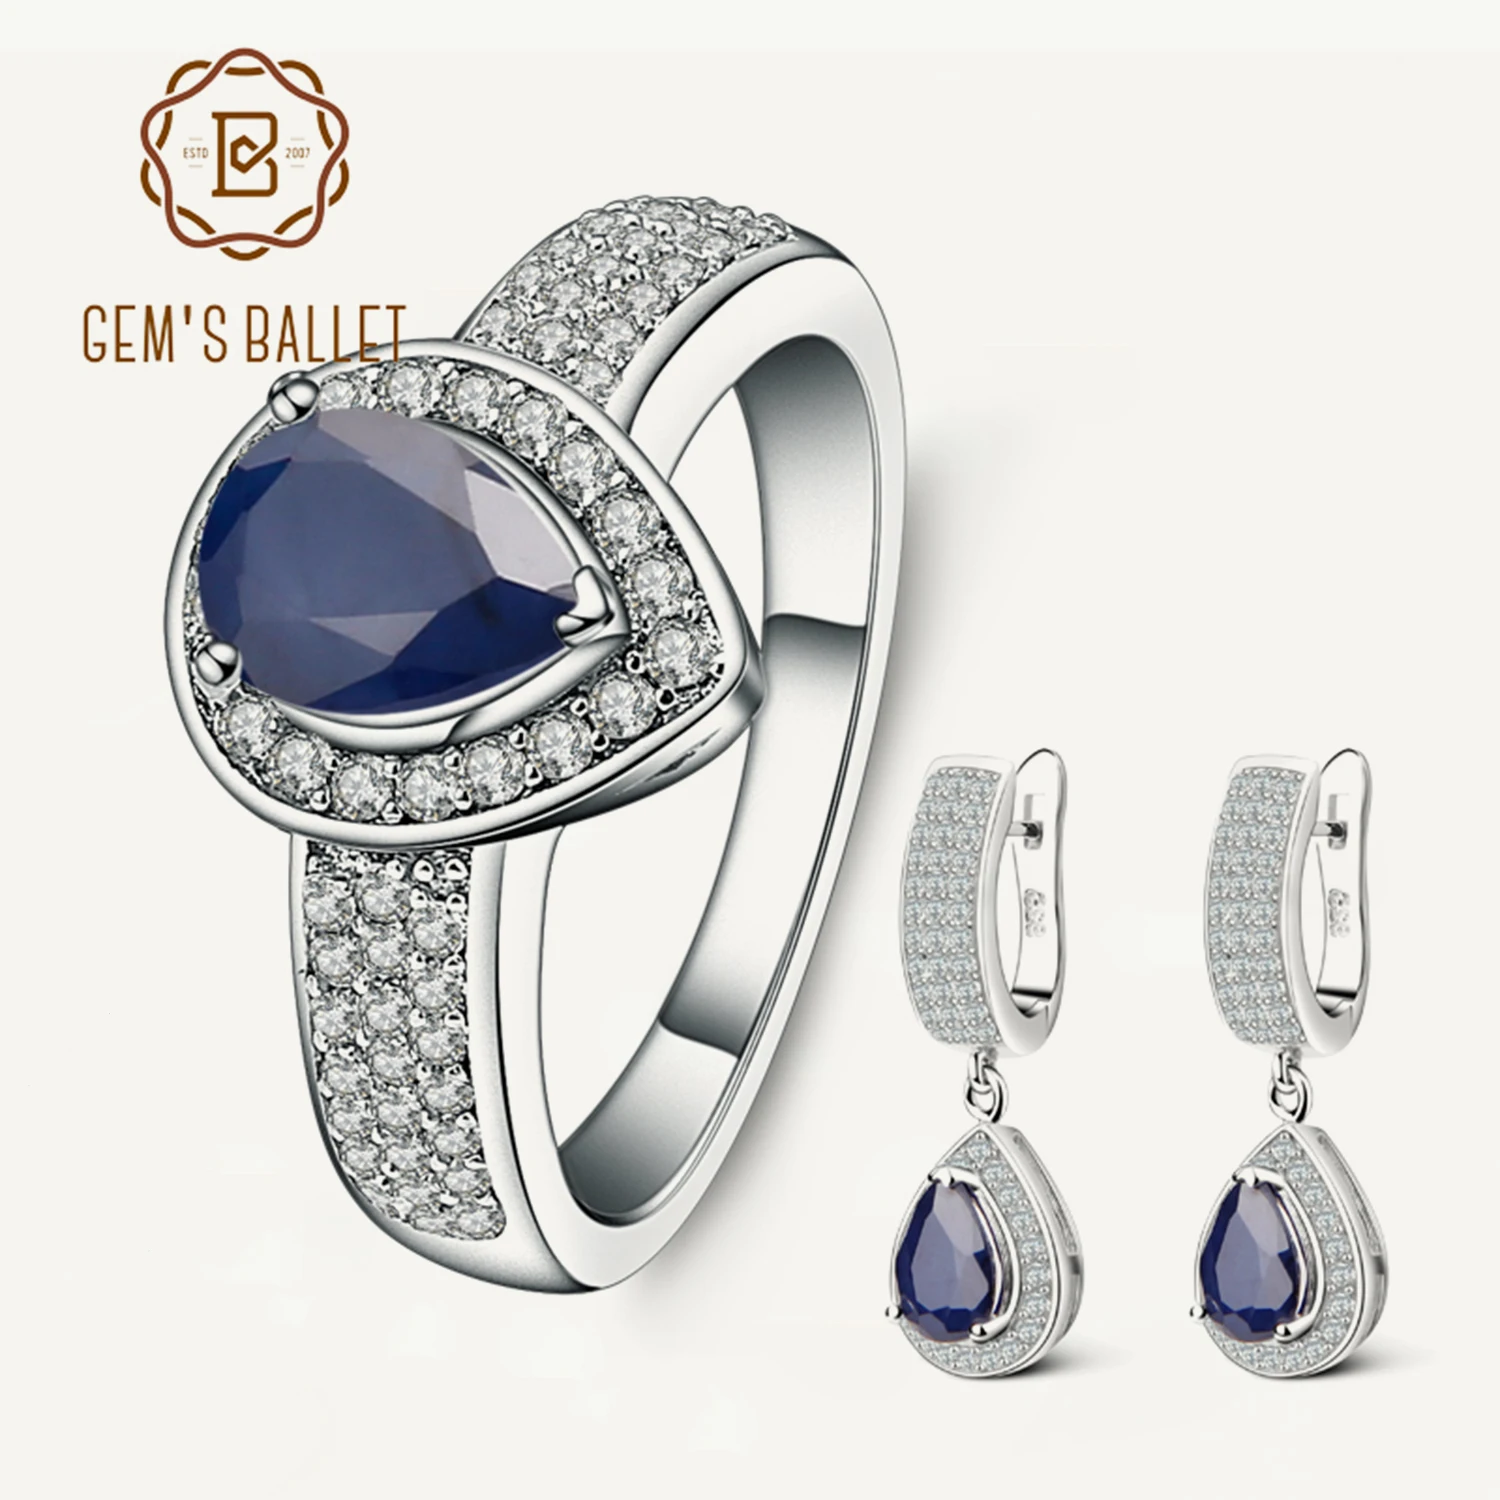 Natural Blue Sapphire Vintage Jewelry Sets 925 Sterling Silver Gemstone ... - $115.98